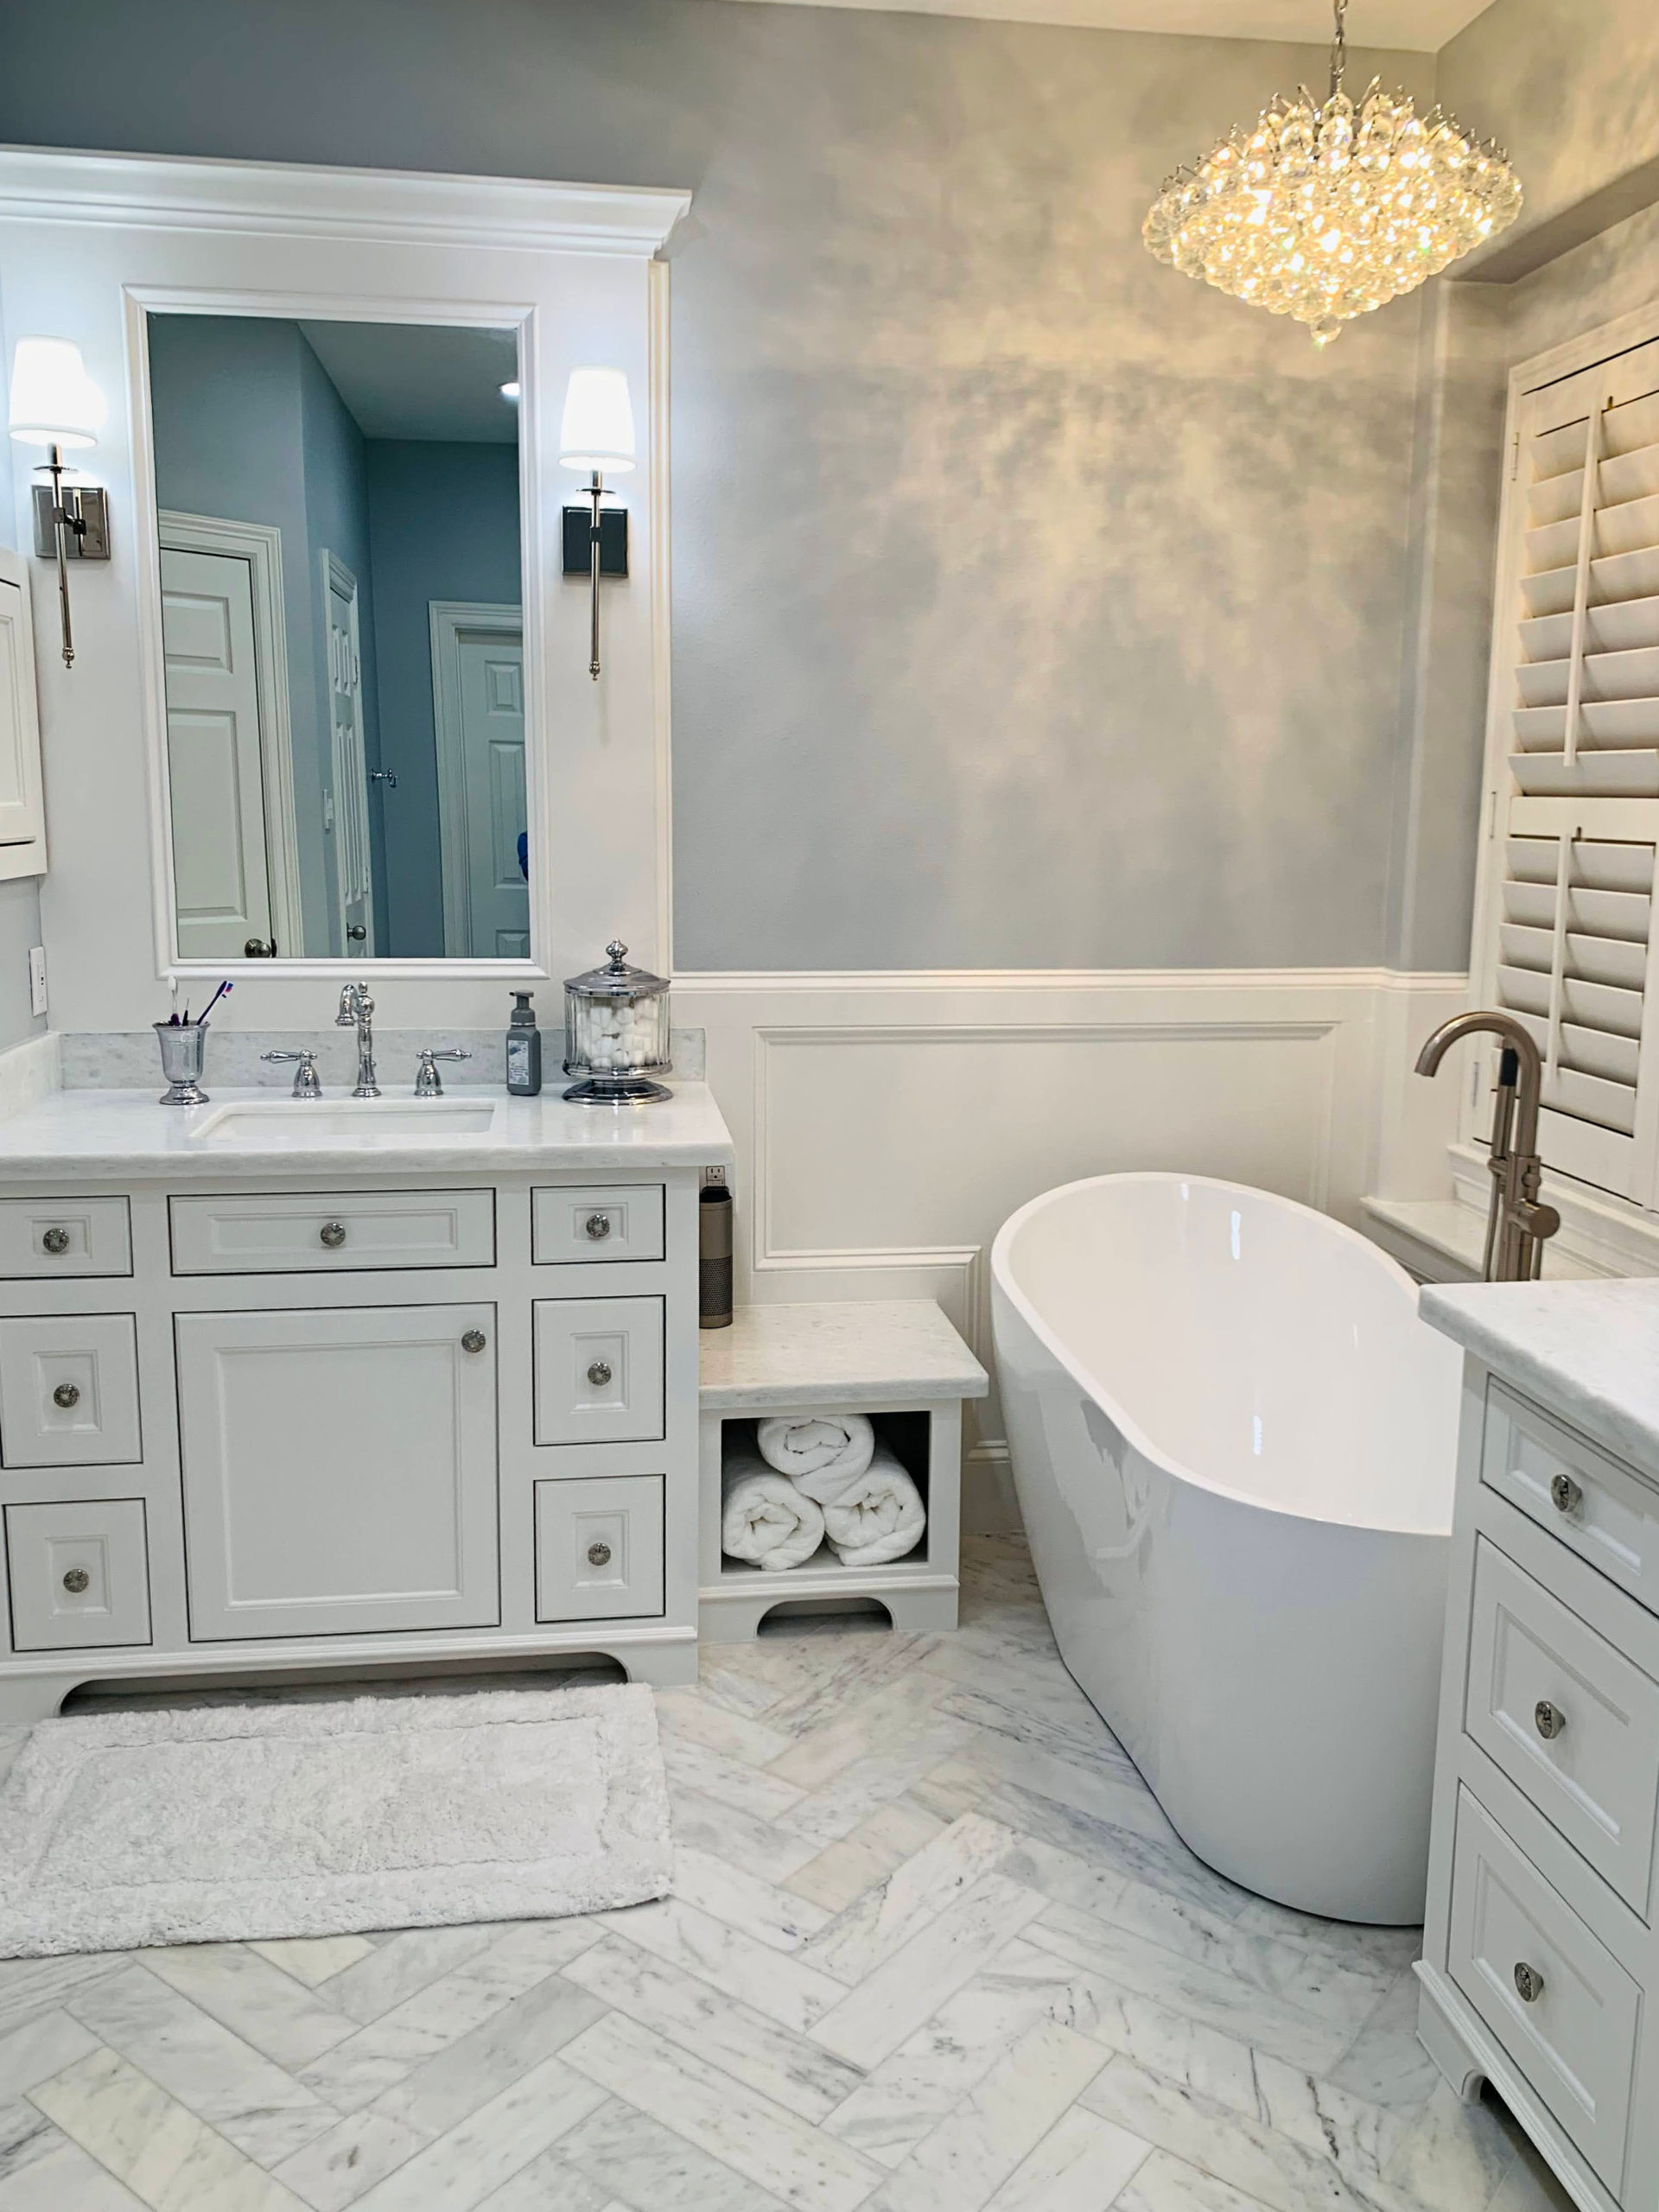 Sherwin Williams North Star, Benjamin Moore chantilly Lace ensuite bathroom, mrable countertop, floor, free standing bathtub, chandelier. Kylie M Interiors Edesign client photos